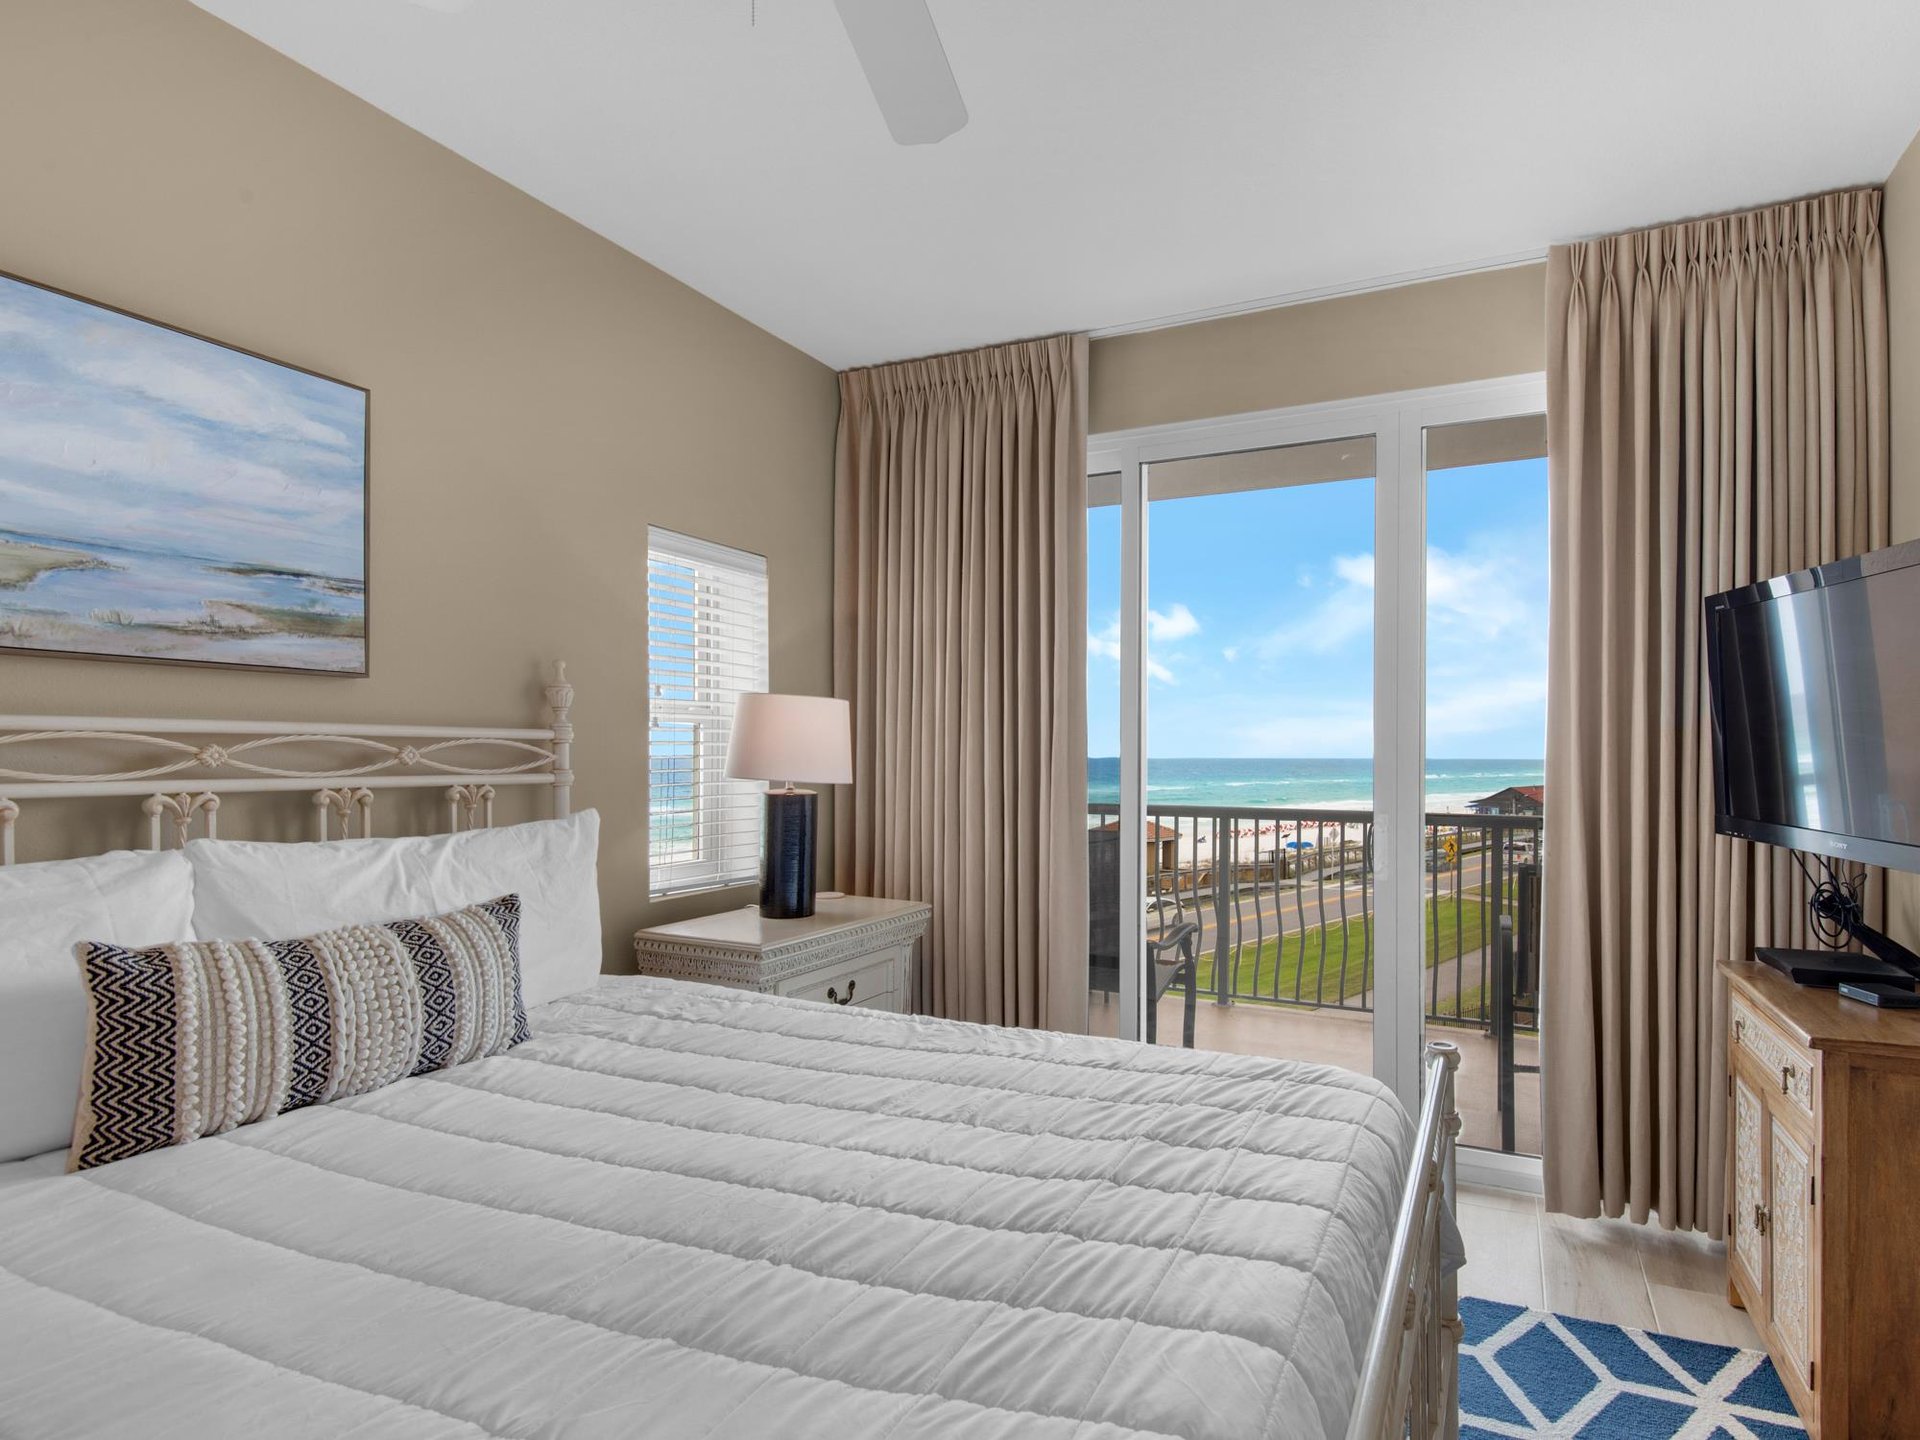 Bedroom 2 with Gulf View